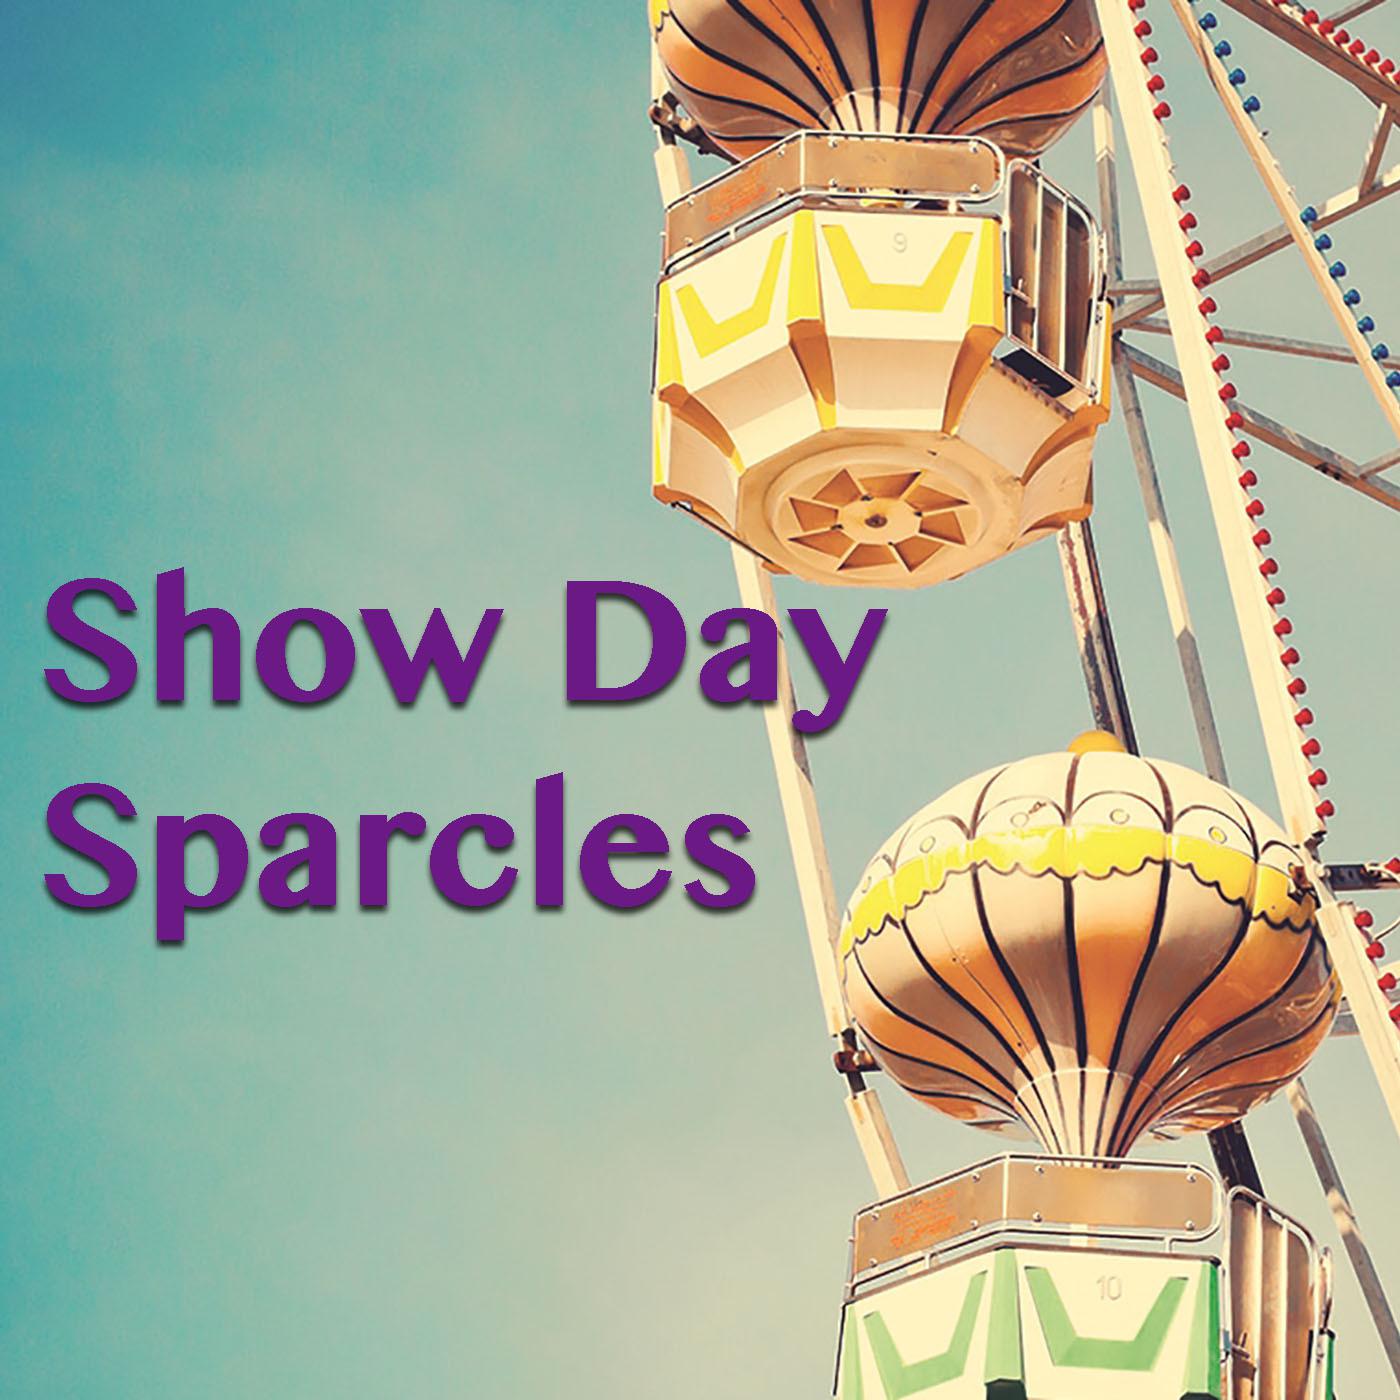 Show Day Sparcles